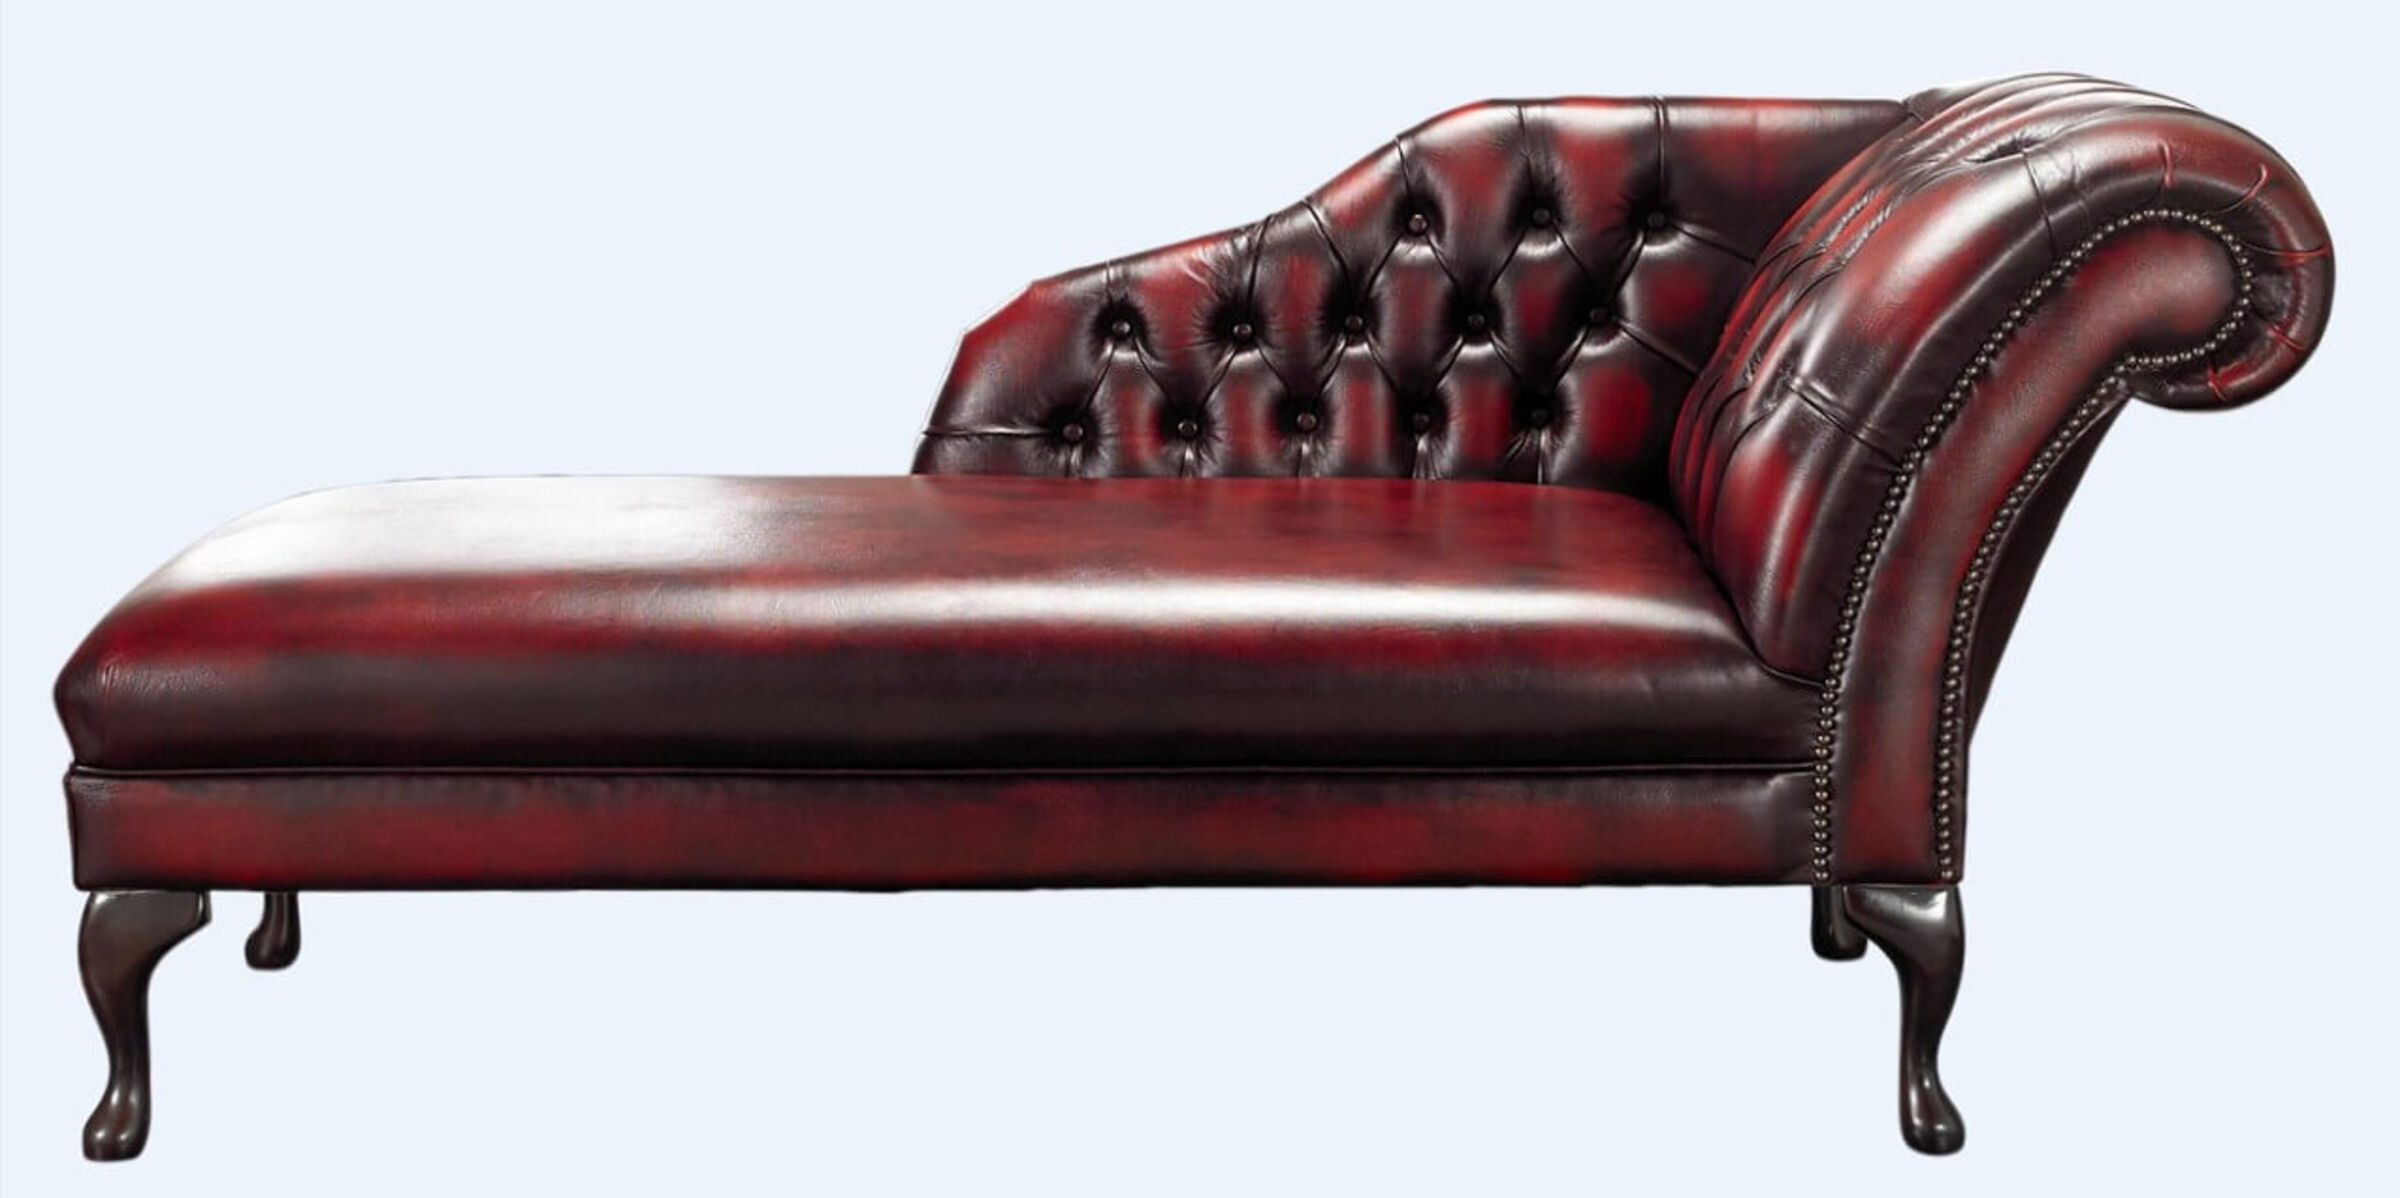 Oxblood Chesterfield Chaise Lounge Day Bed, Tan Leather Chaise Lounge